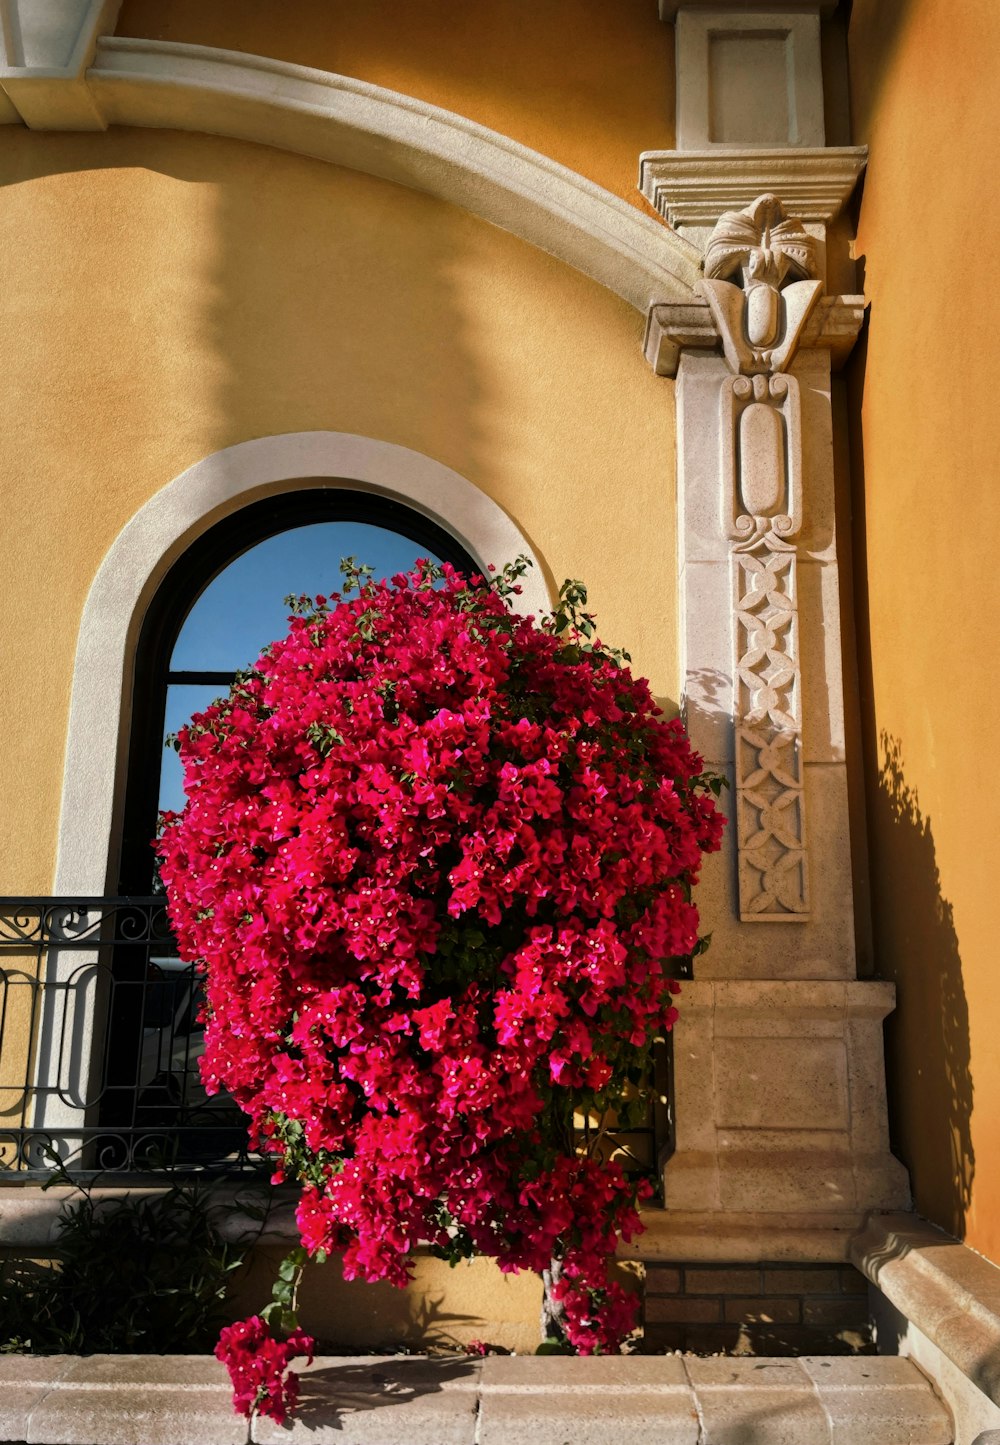 a potted plant with red flowers sitting on a ledge